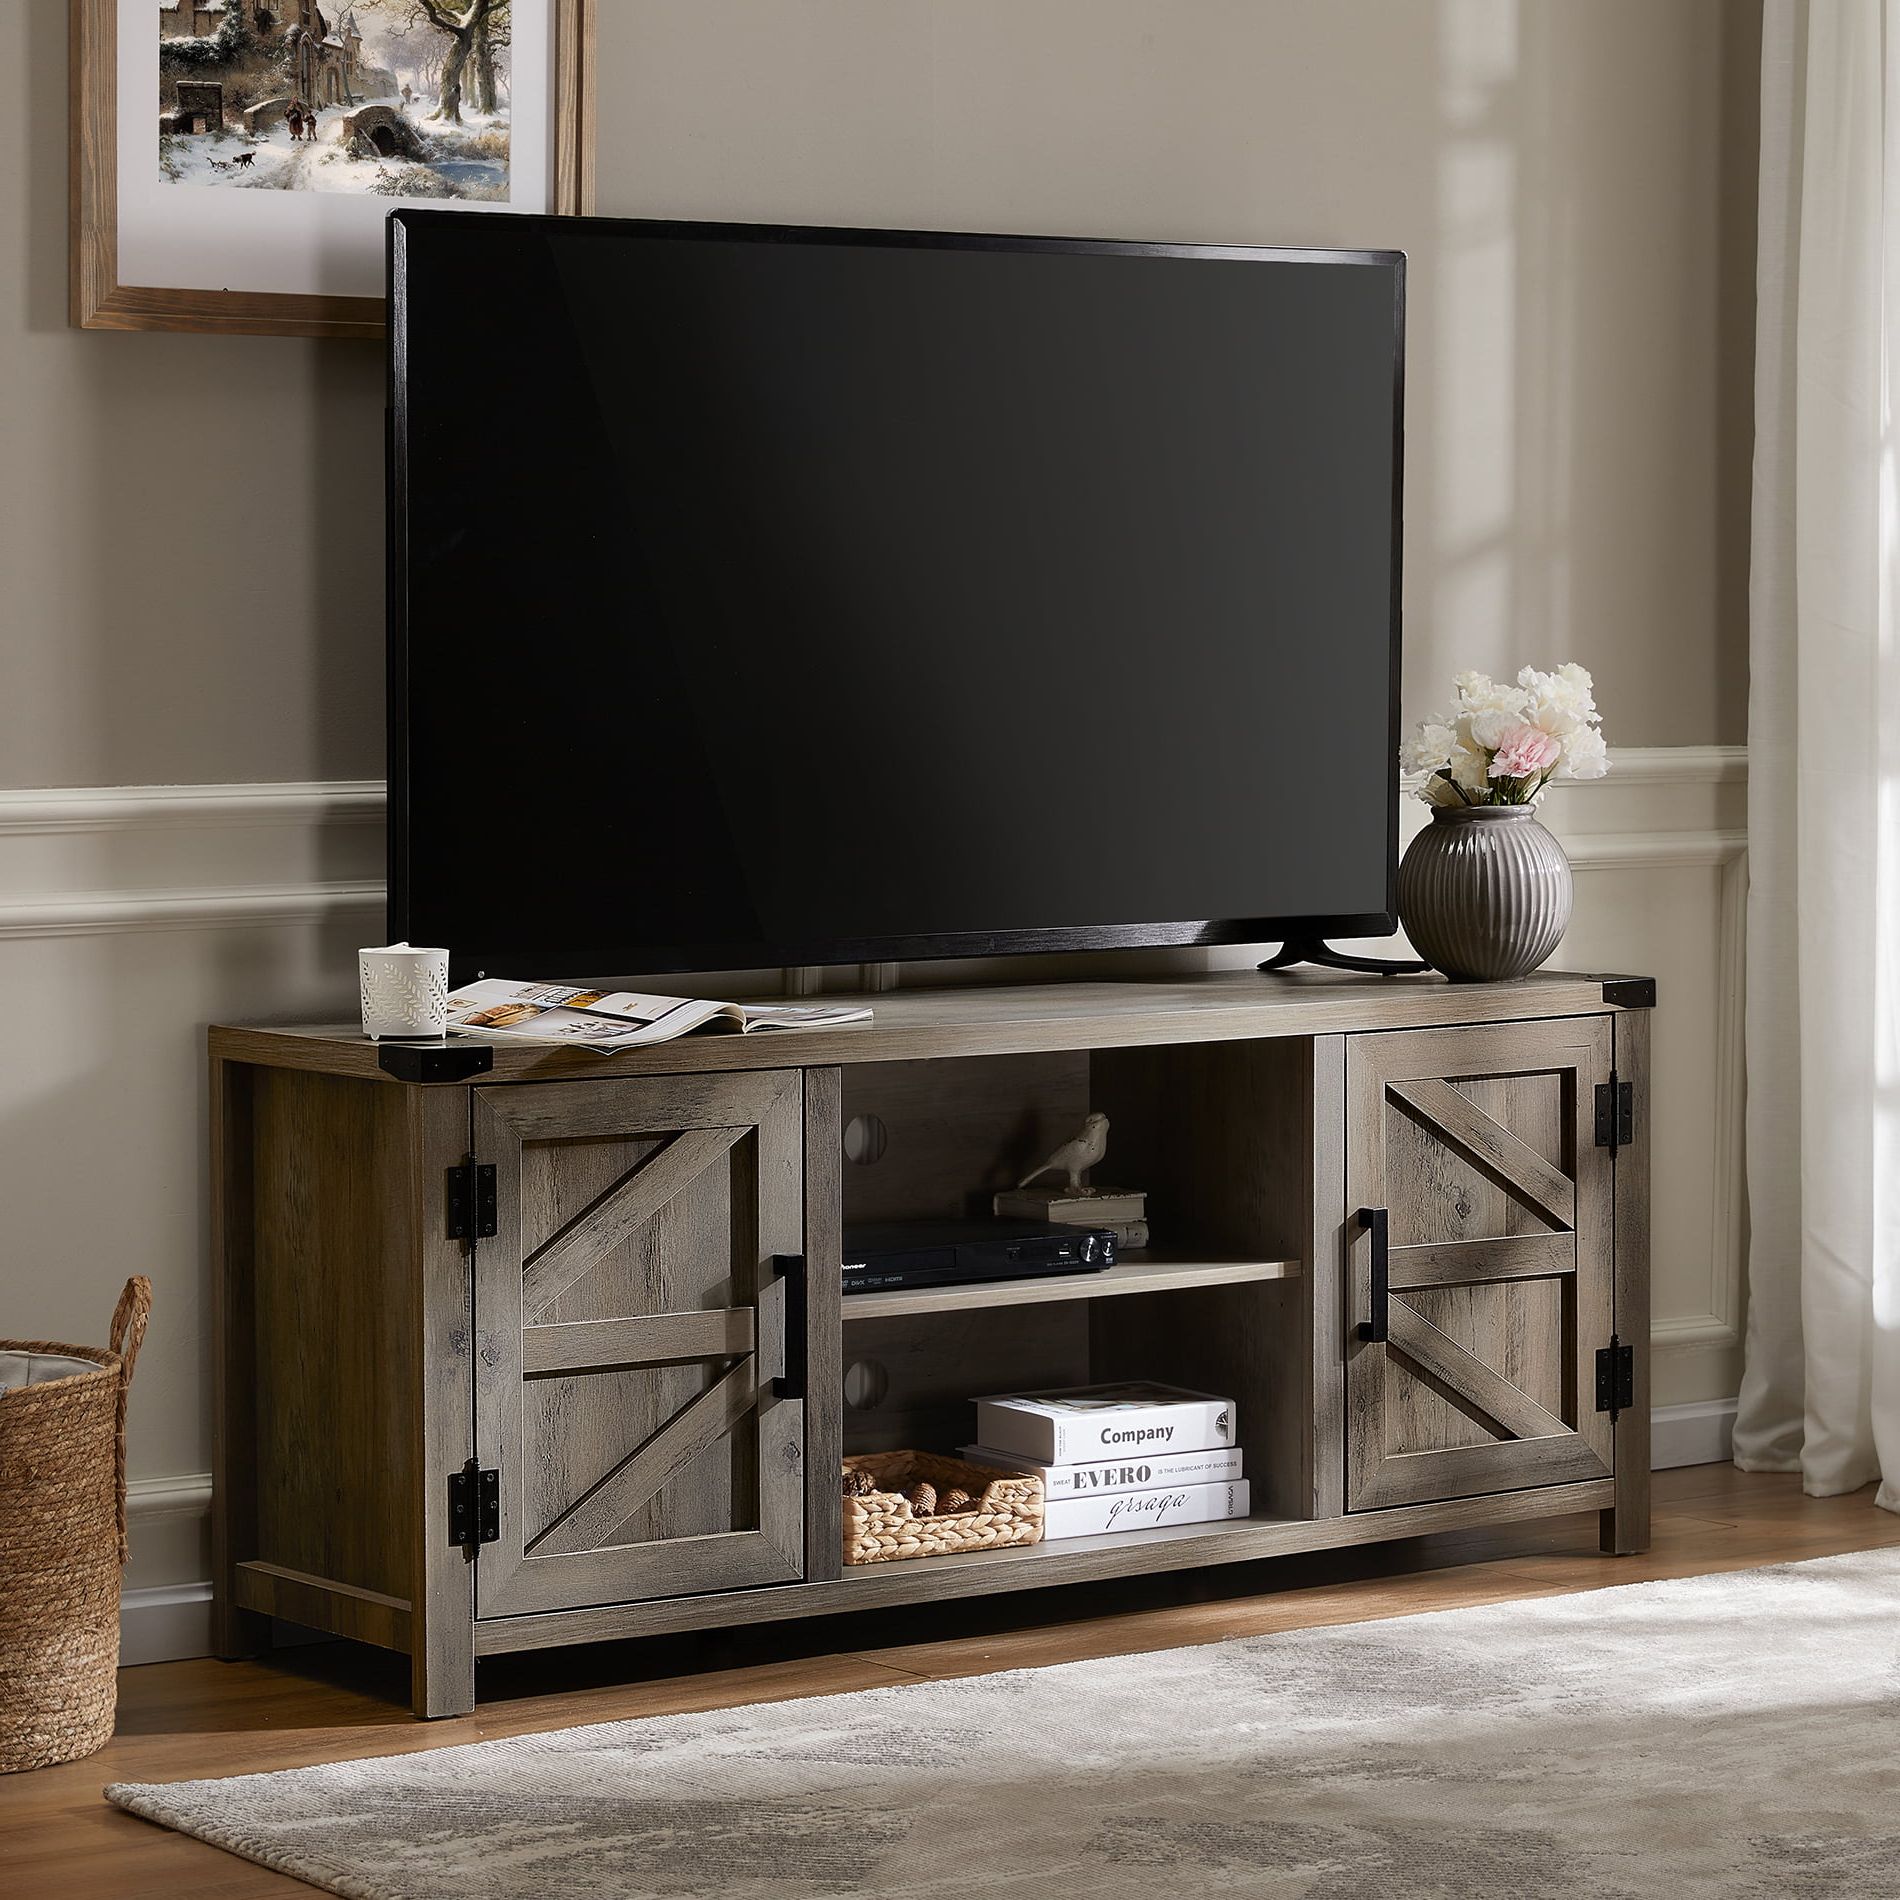 Most Recent Tv Stands With Storage Regarding Fitueyes Farmhouse Barn Door Wood Tv Stands For 70" Flat Screen, Media Console  Storage Cabinet, Rustic Gray Wash Entertainment Center For Home Living  Room, 59 Inch – Walmart (View 7 of 10)